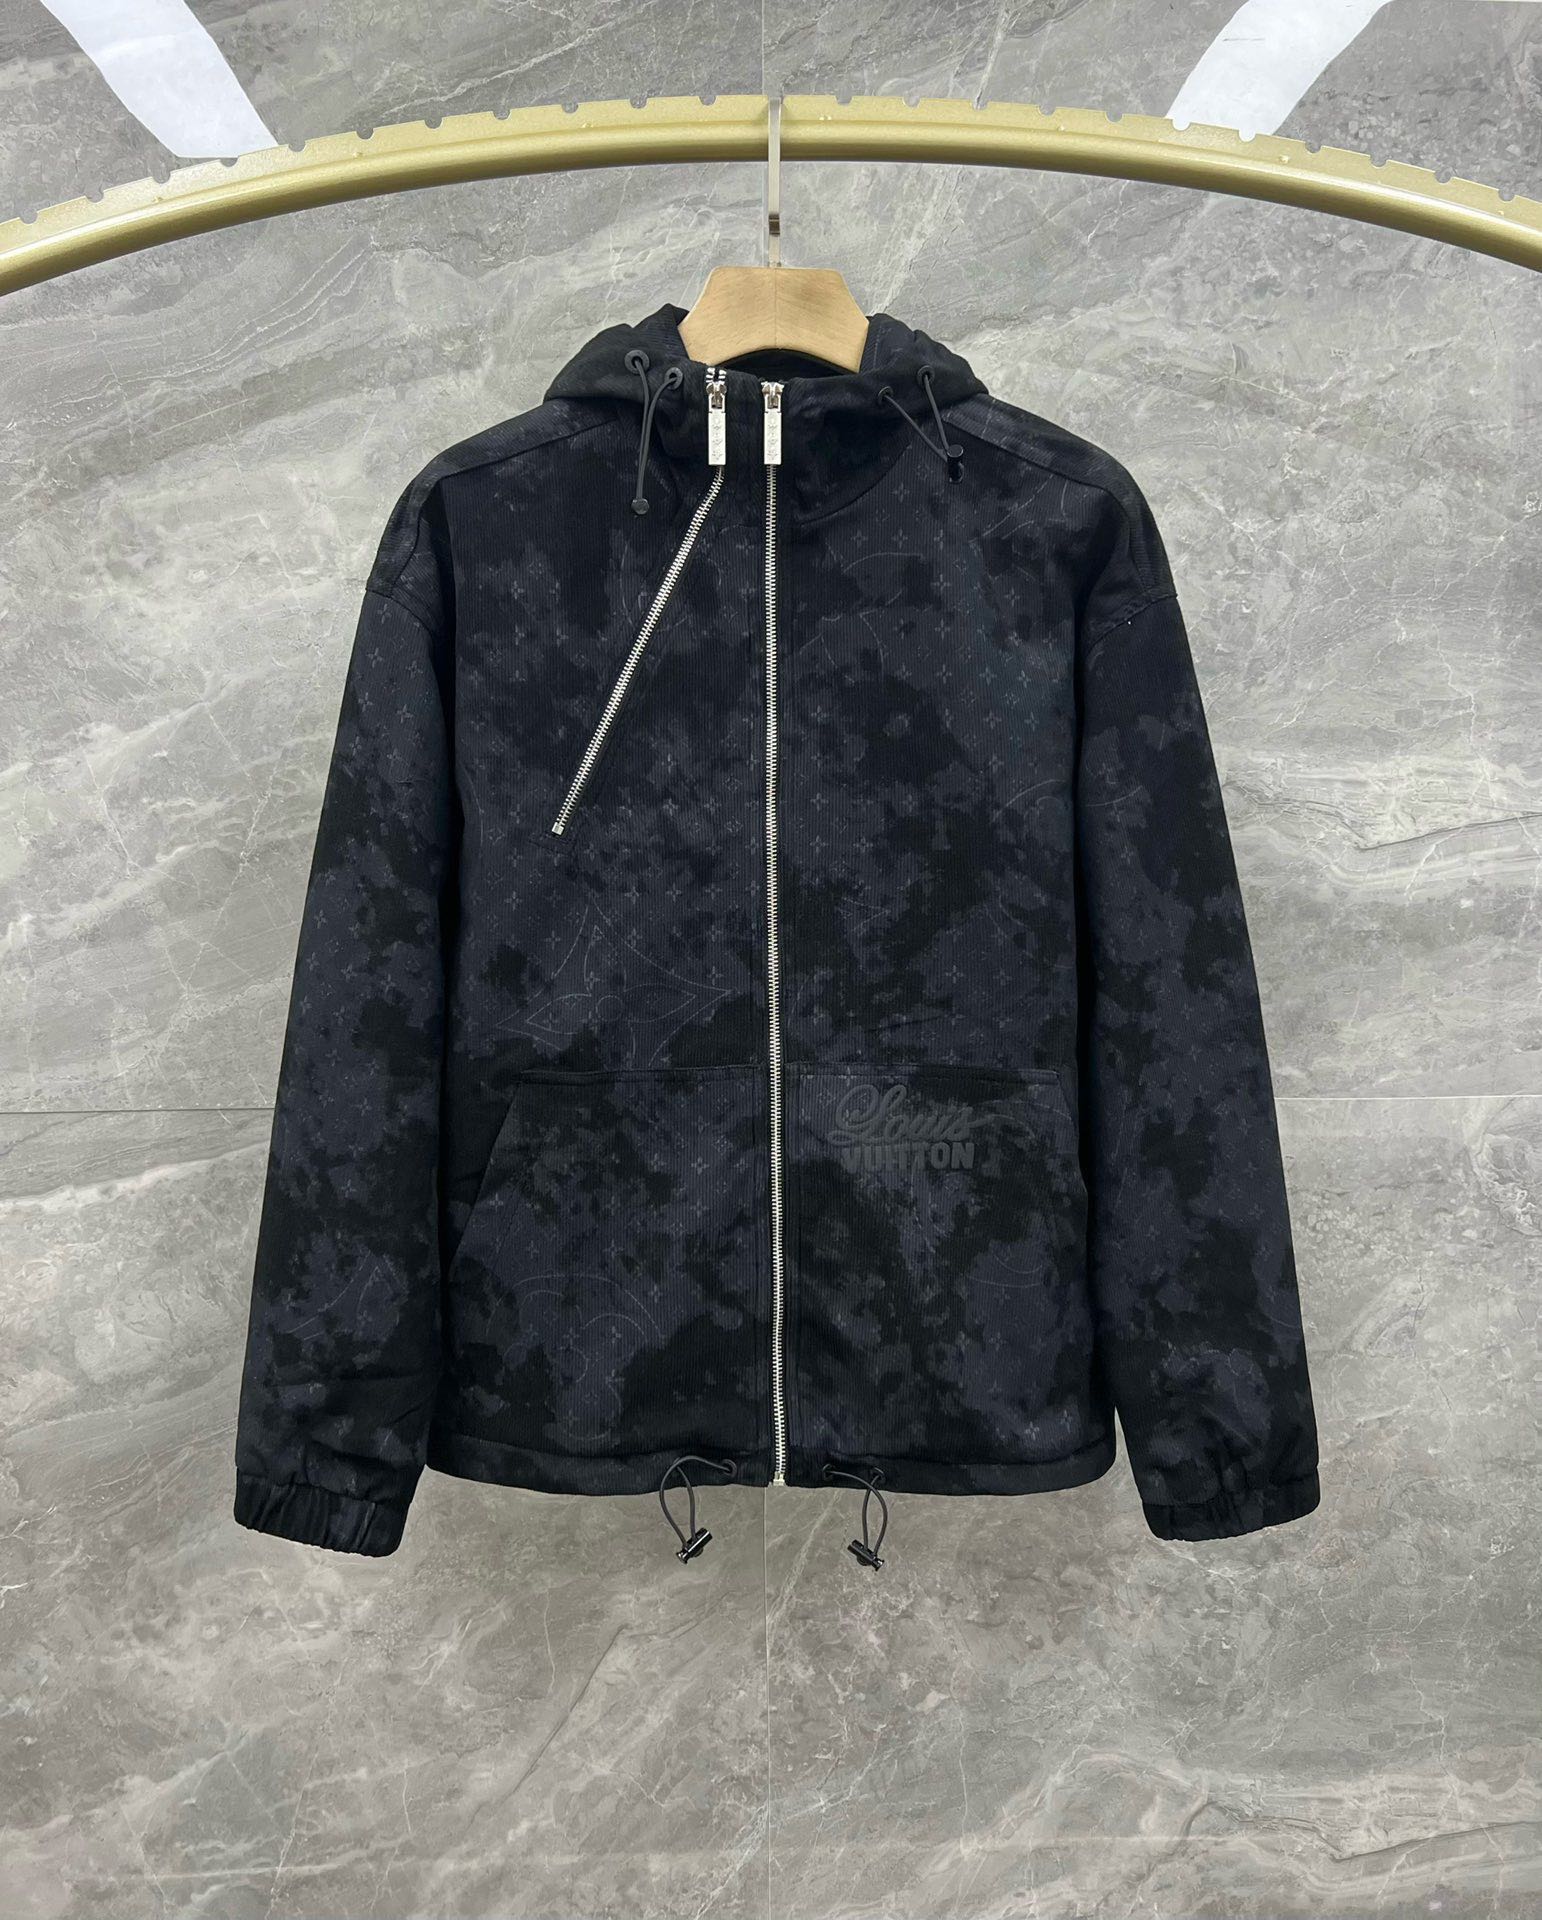 Louis Vuitton Good
 Clothing Coats & Jackets Printing Unisex Cotton Knitted Knitting Fall/Winter Collection Fashion Hooded Top